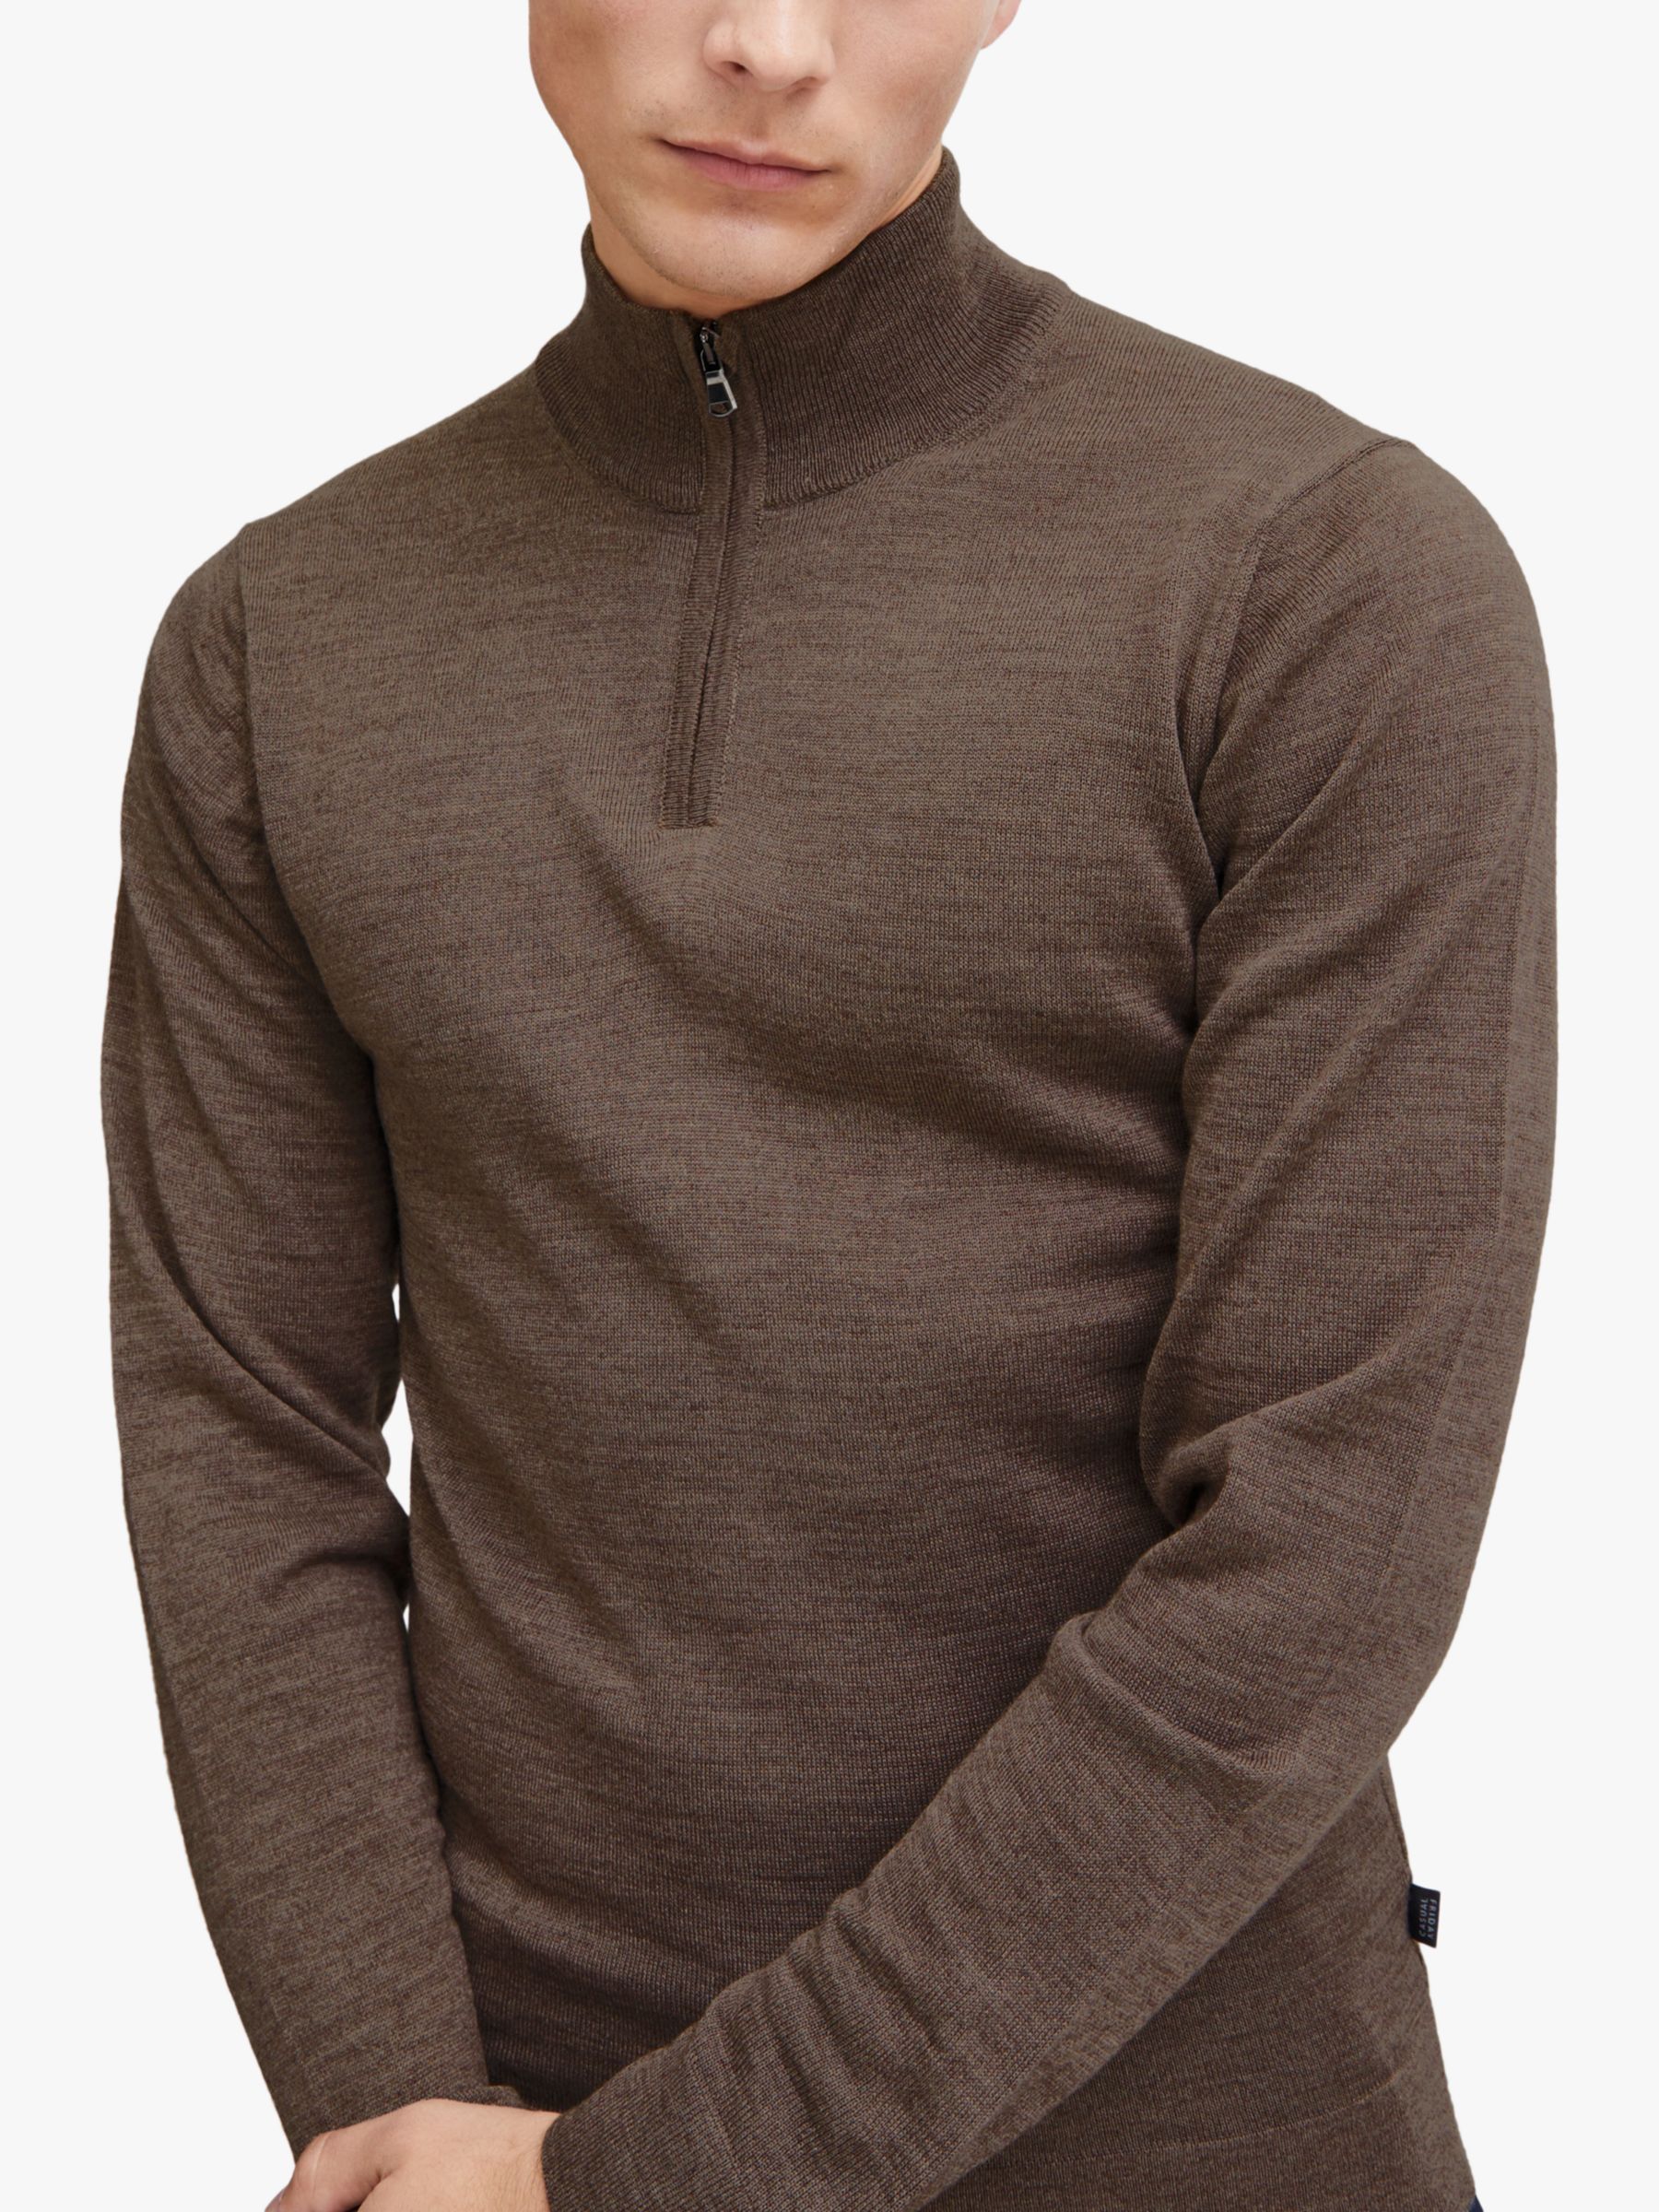 Casual Friday Karlo Long Sleeve Knitted Zip Jumper, Brown, S